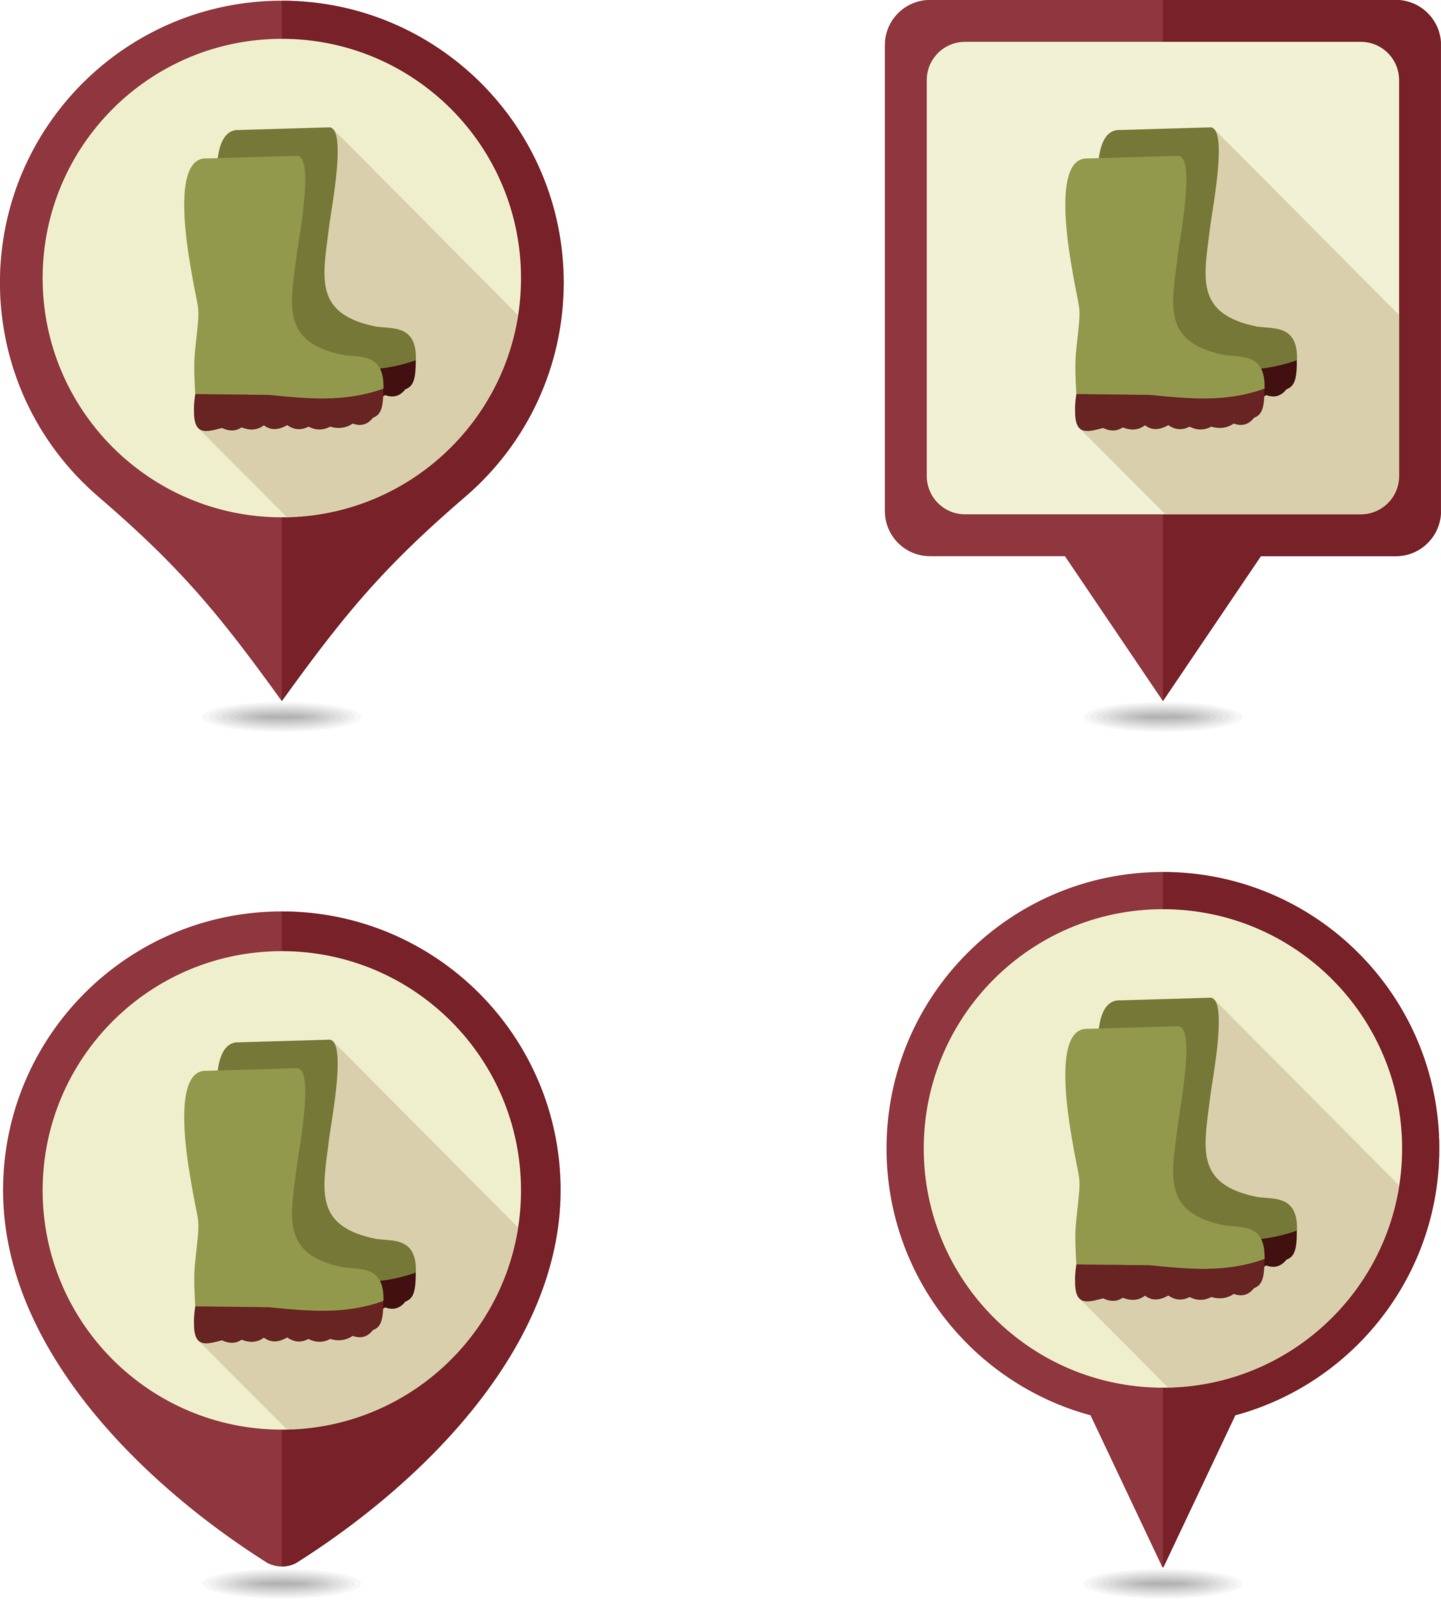 Rubber boots, gumboots, wellies flat vector pin map icon. Map pointer. Map markers. Garden, eps 10